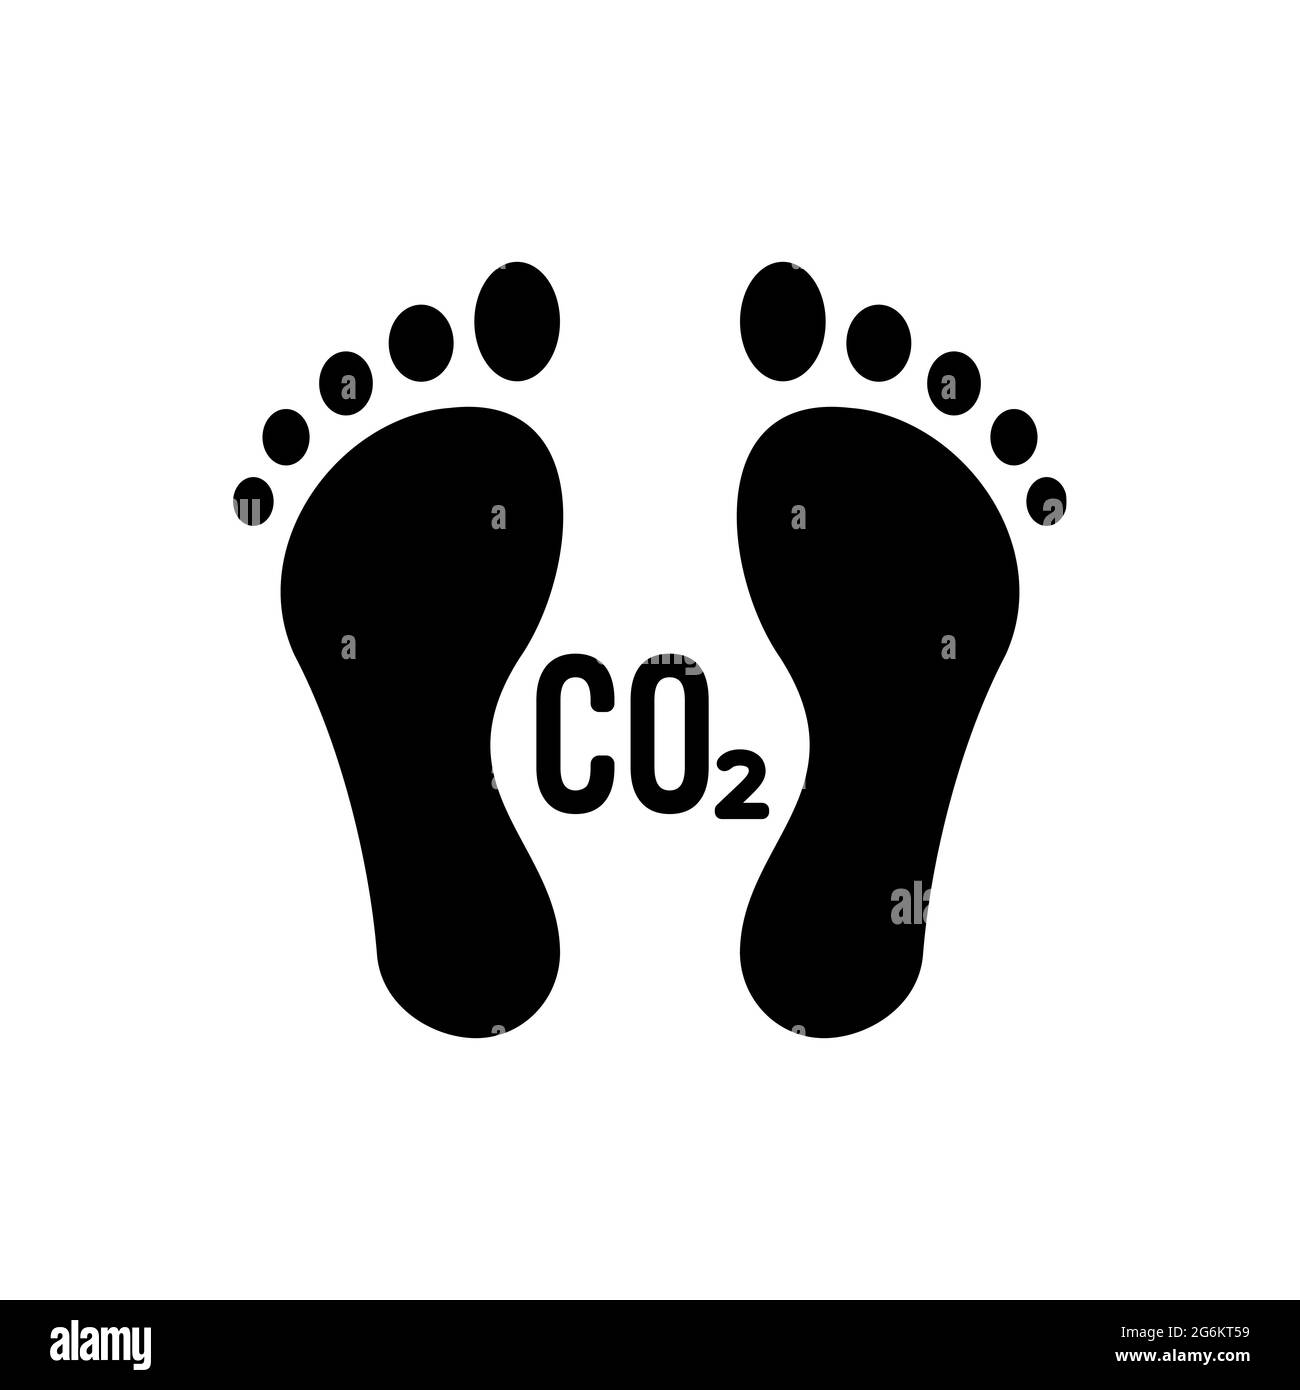 Carbon footprint icon. Black footprints with CO2 text. Two human feet. Toxic gases pollution, global warming concept. Environmental damage.  Vector Stock Vector